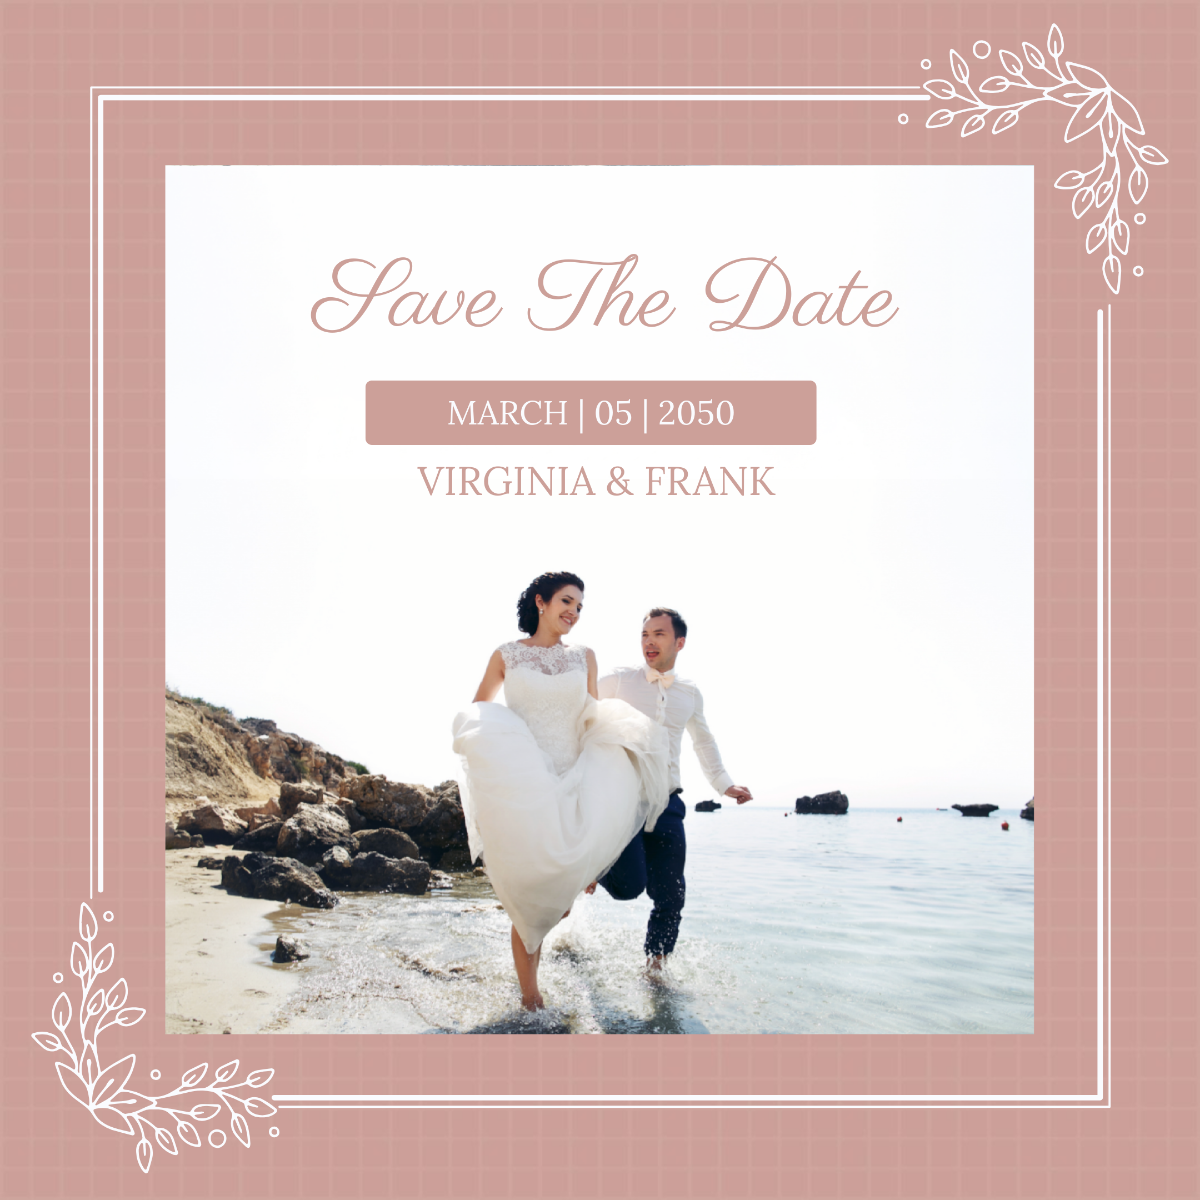 Save The Date Instagram Banner Template